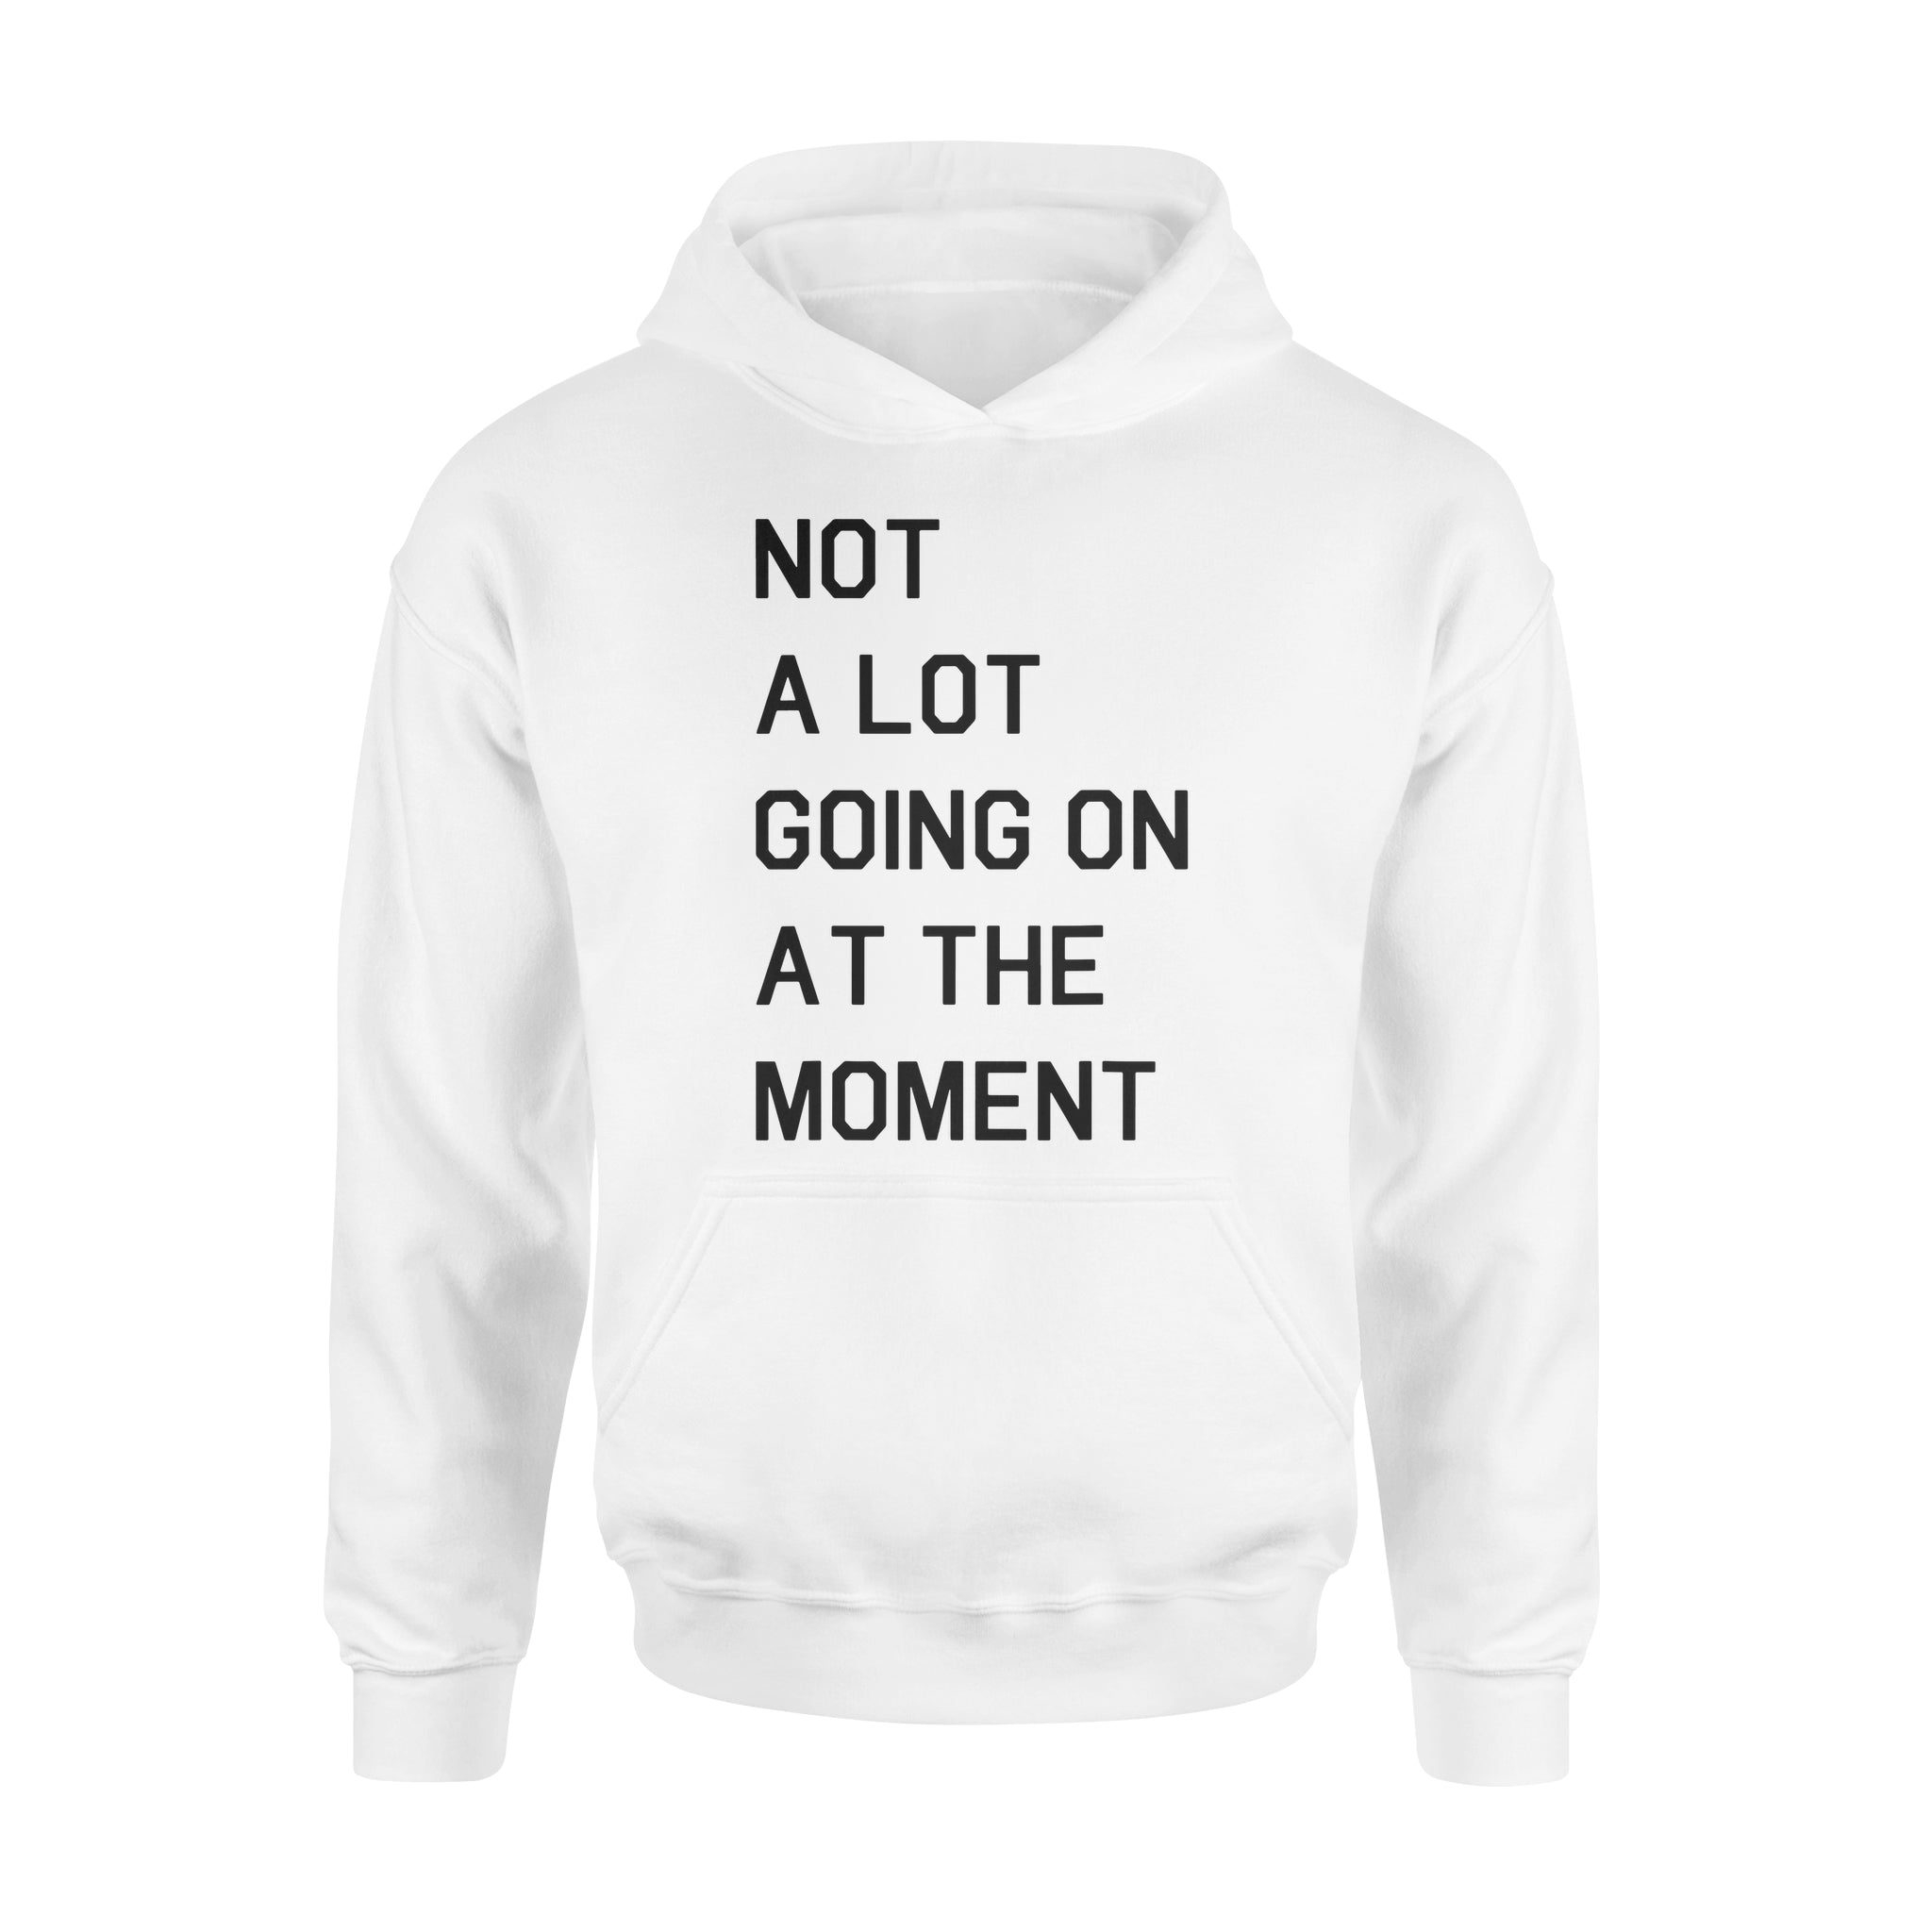 Not A Lot Going On At The Moment - Standard Hoodie